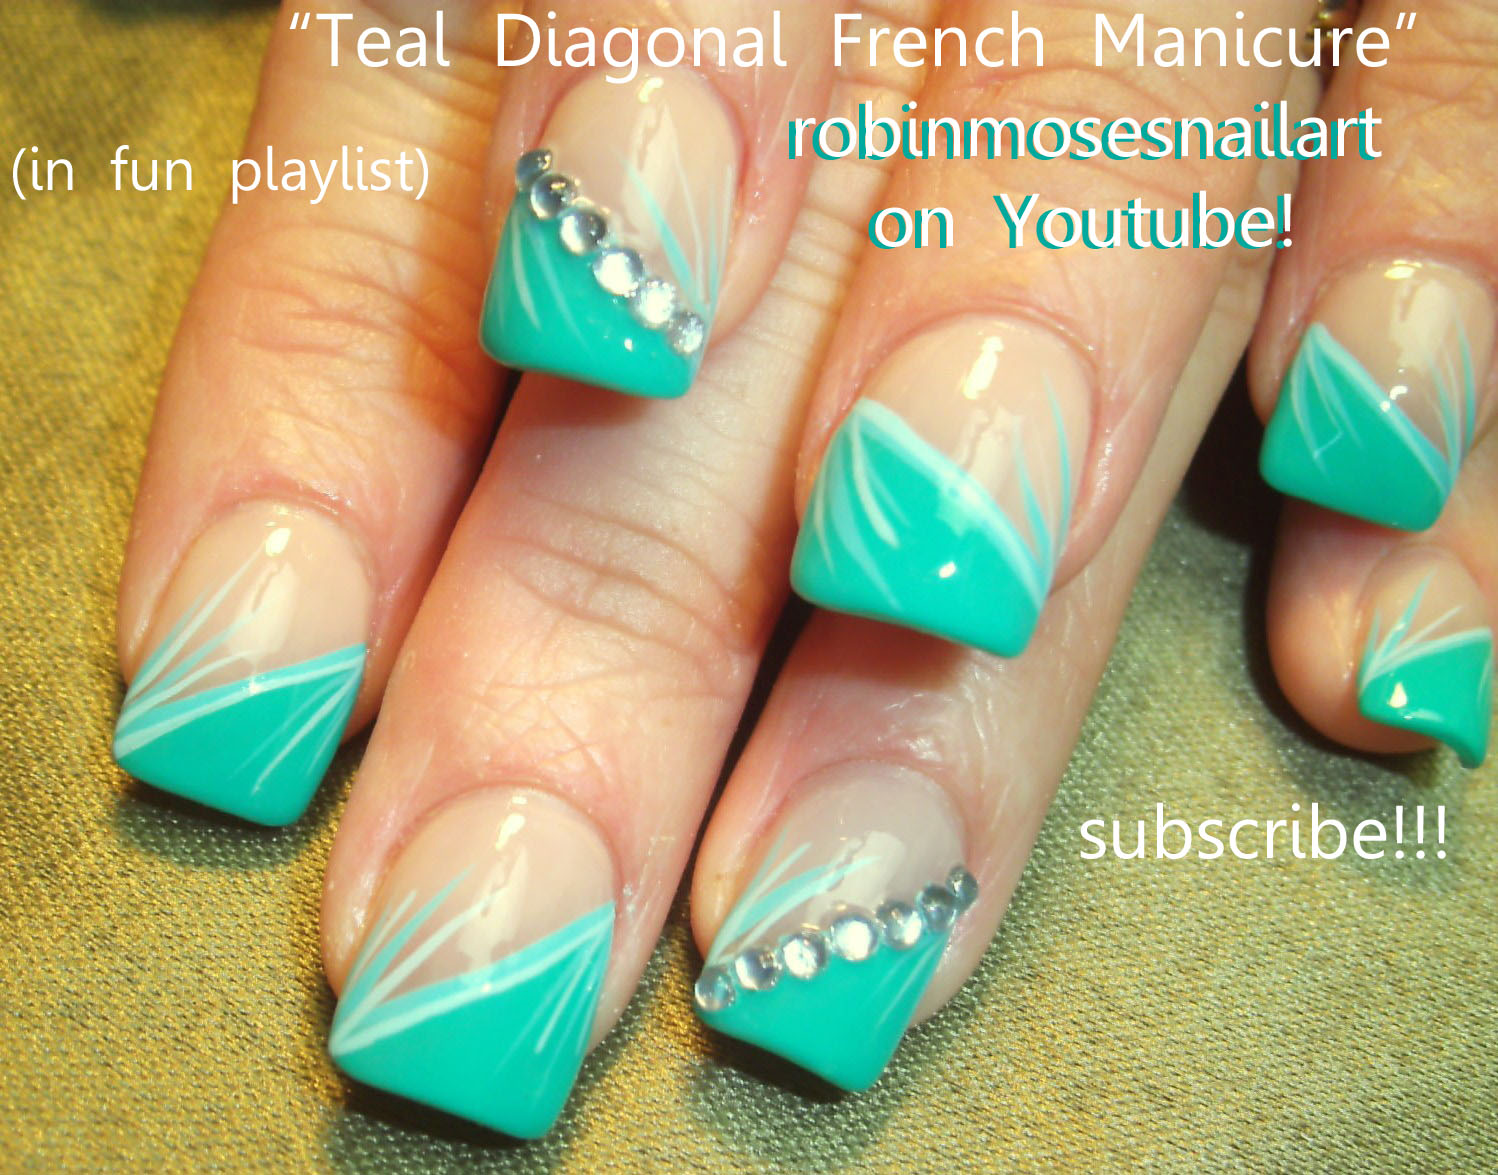 Teal and Black Nail Designs - wide 4